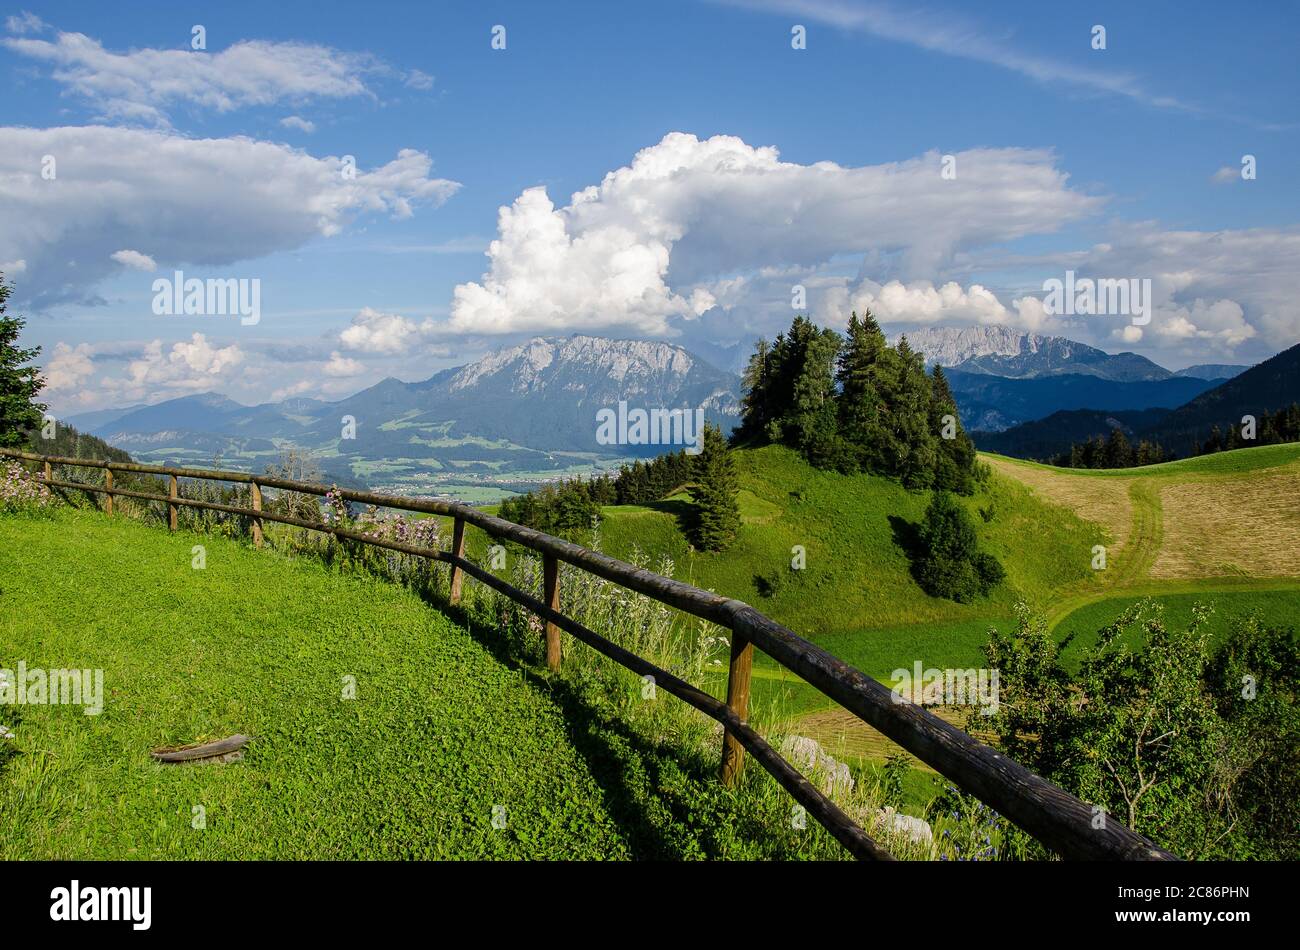 Page 3 - Gasthaus High Resolution Stock Photography and Images - Alamy